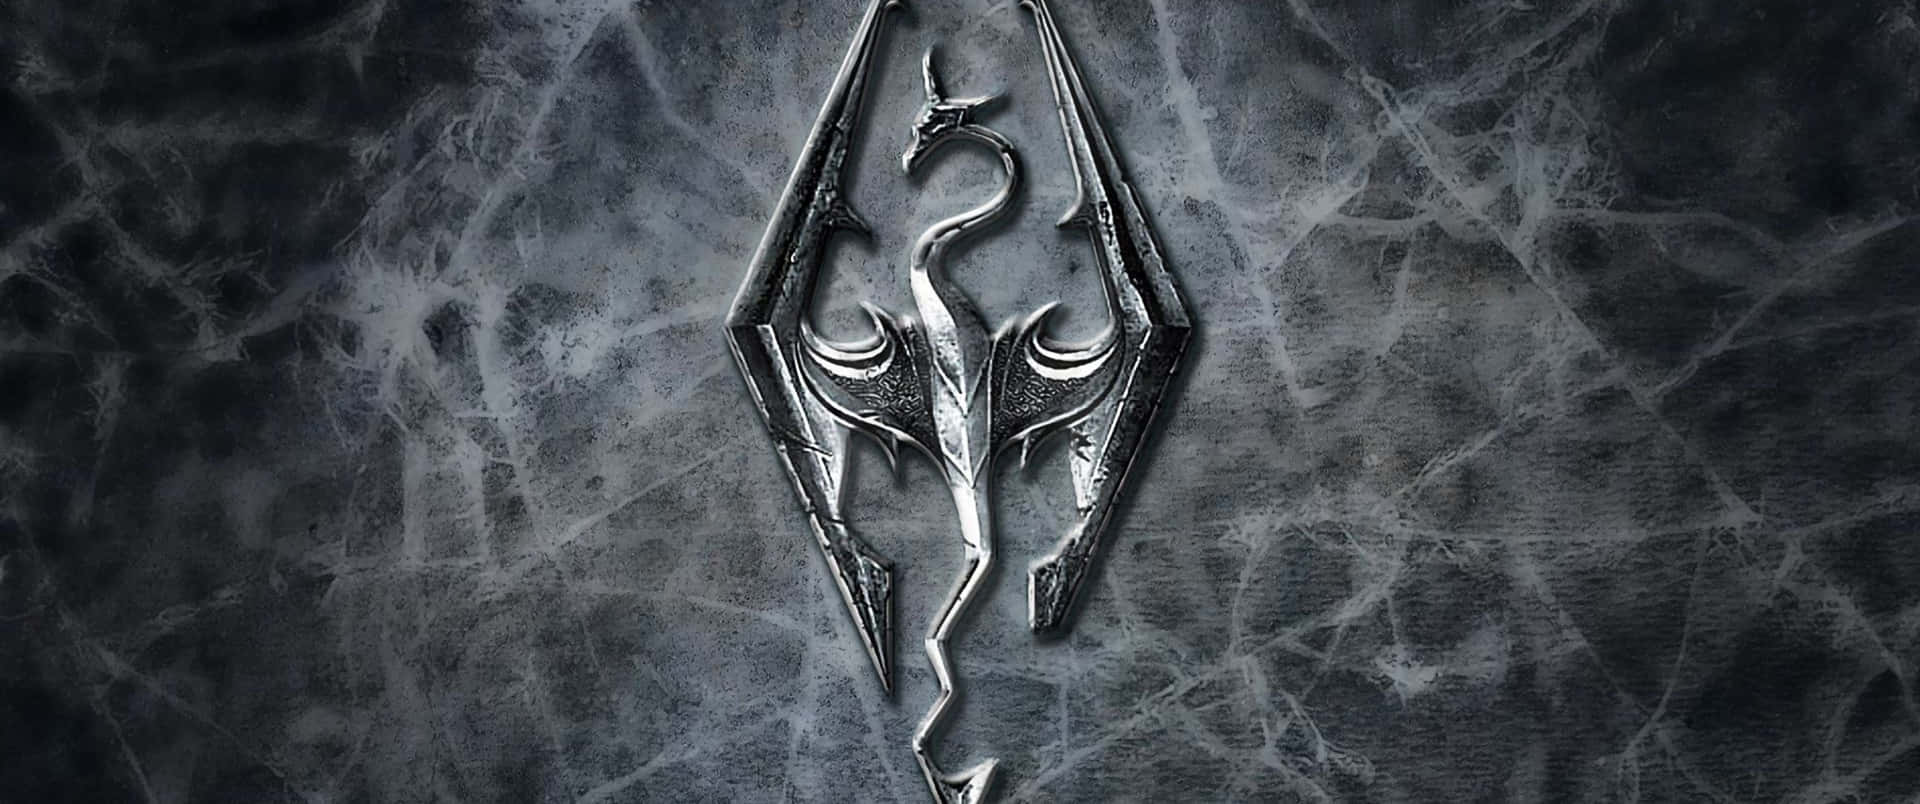 "Explore Tamriel and Become a Hero in The Elder Scrolls V: Skyrim."